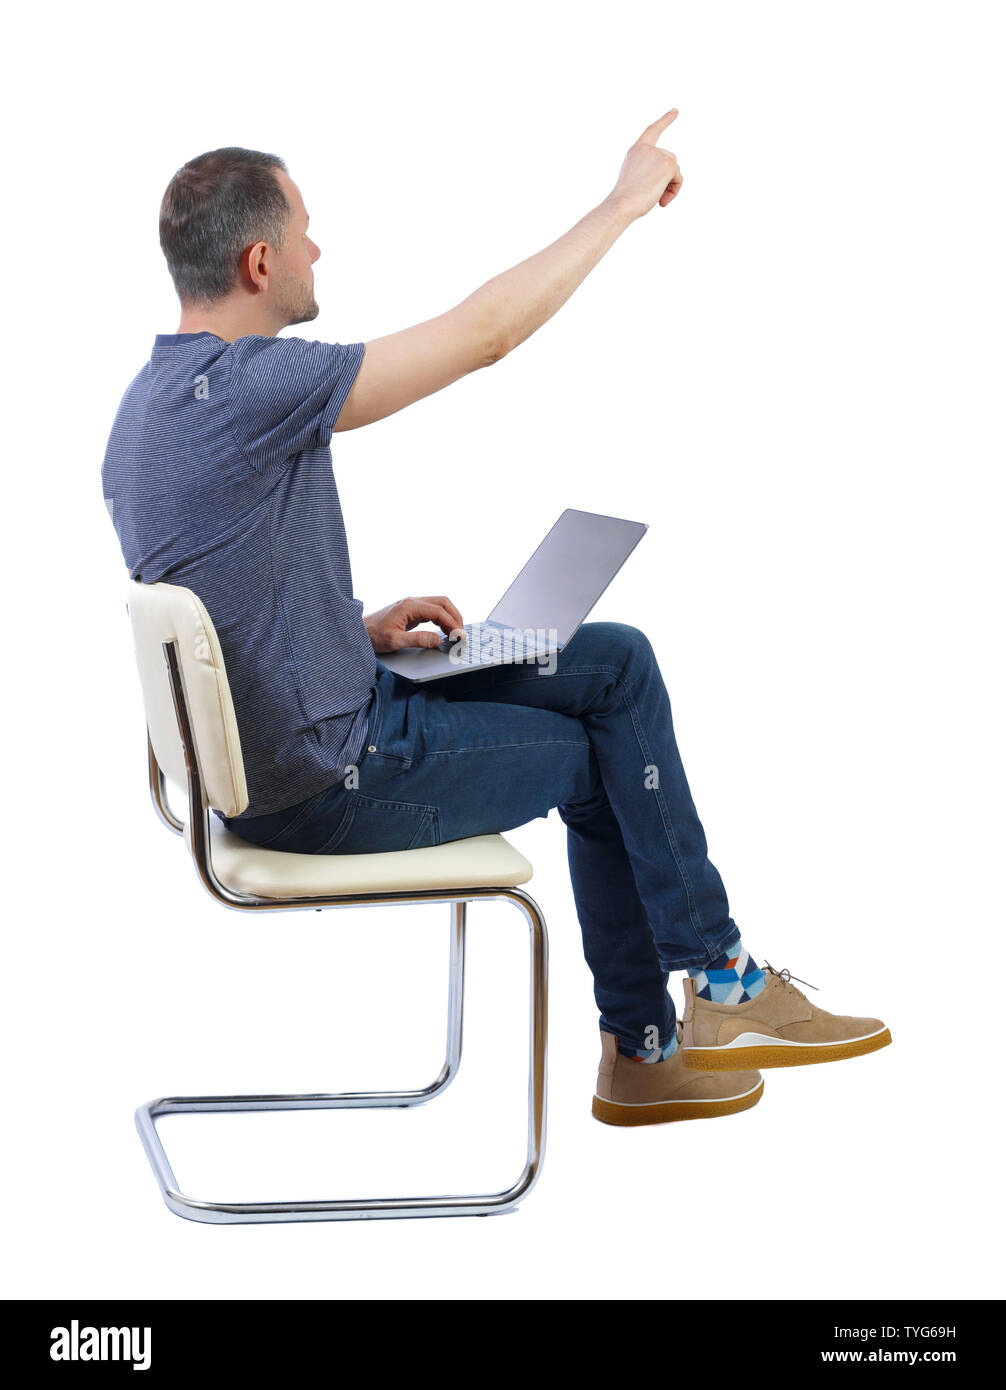 person sitting in chair side view